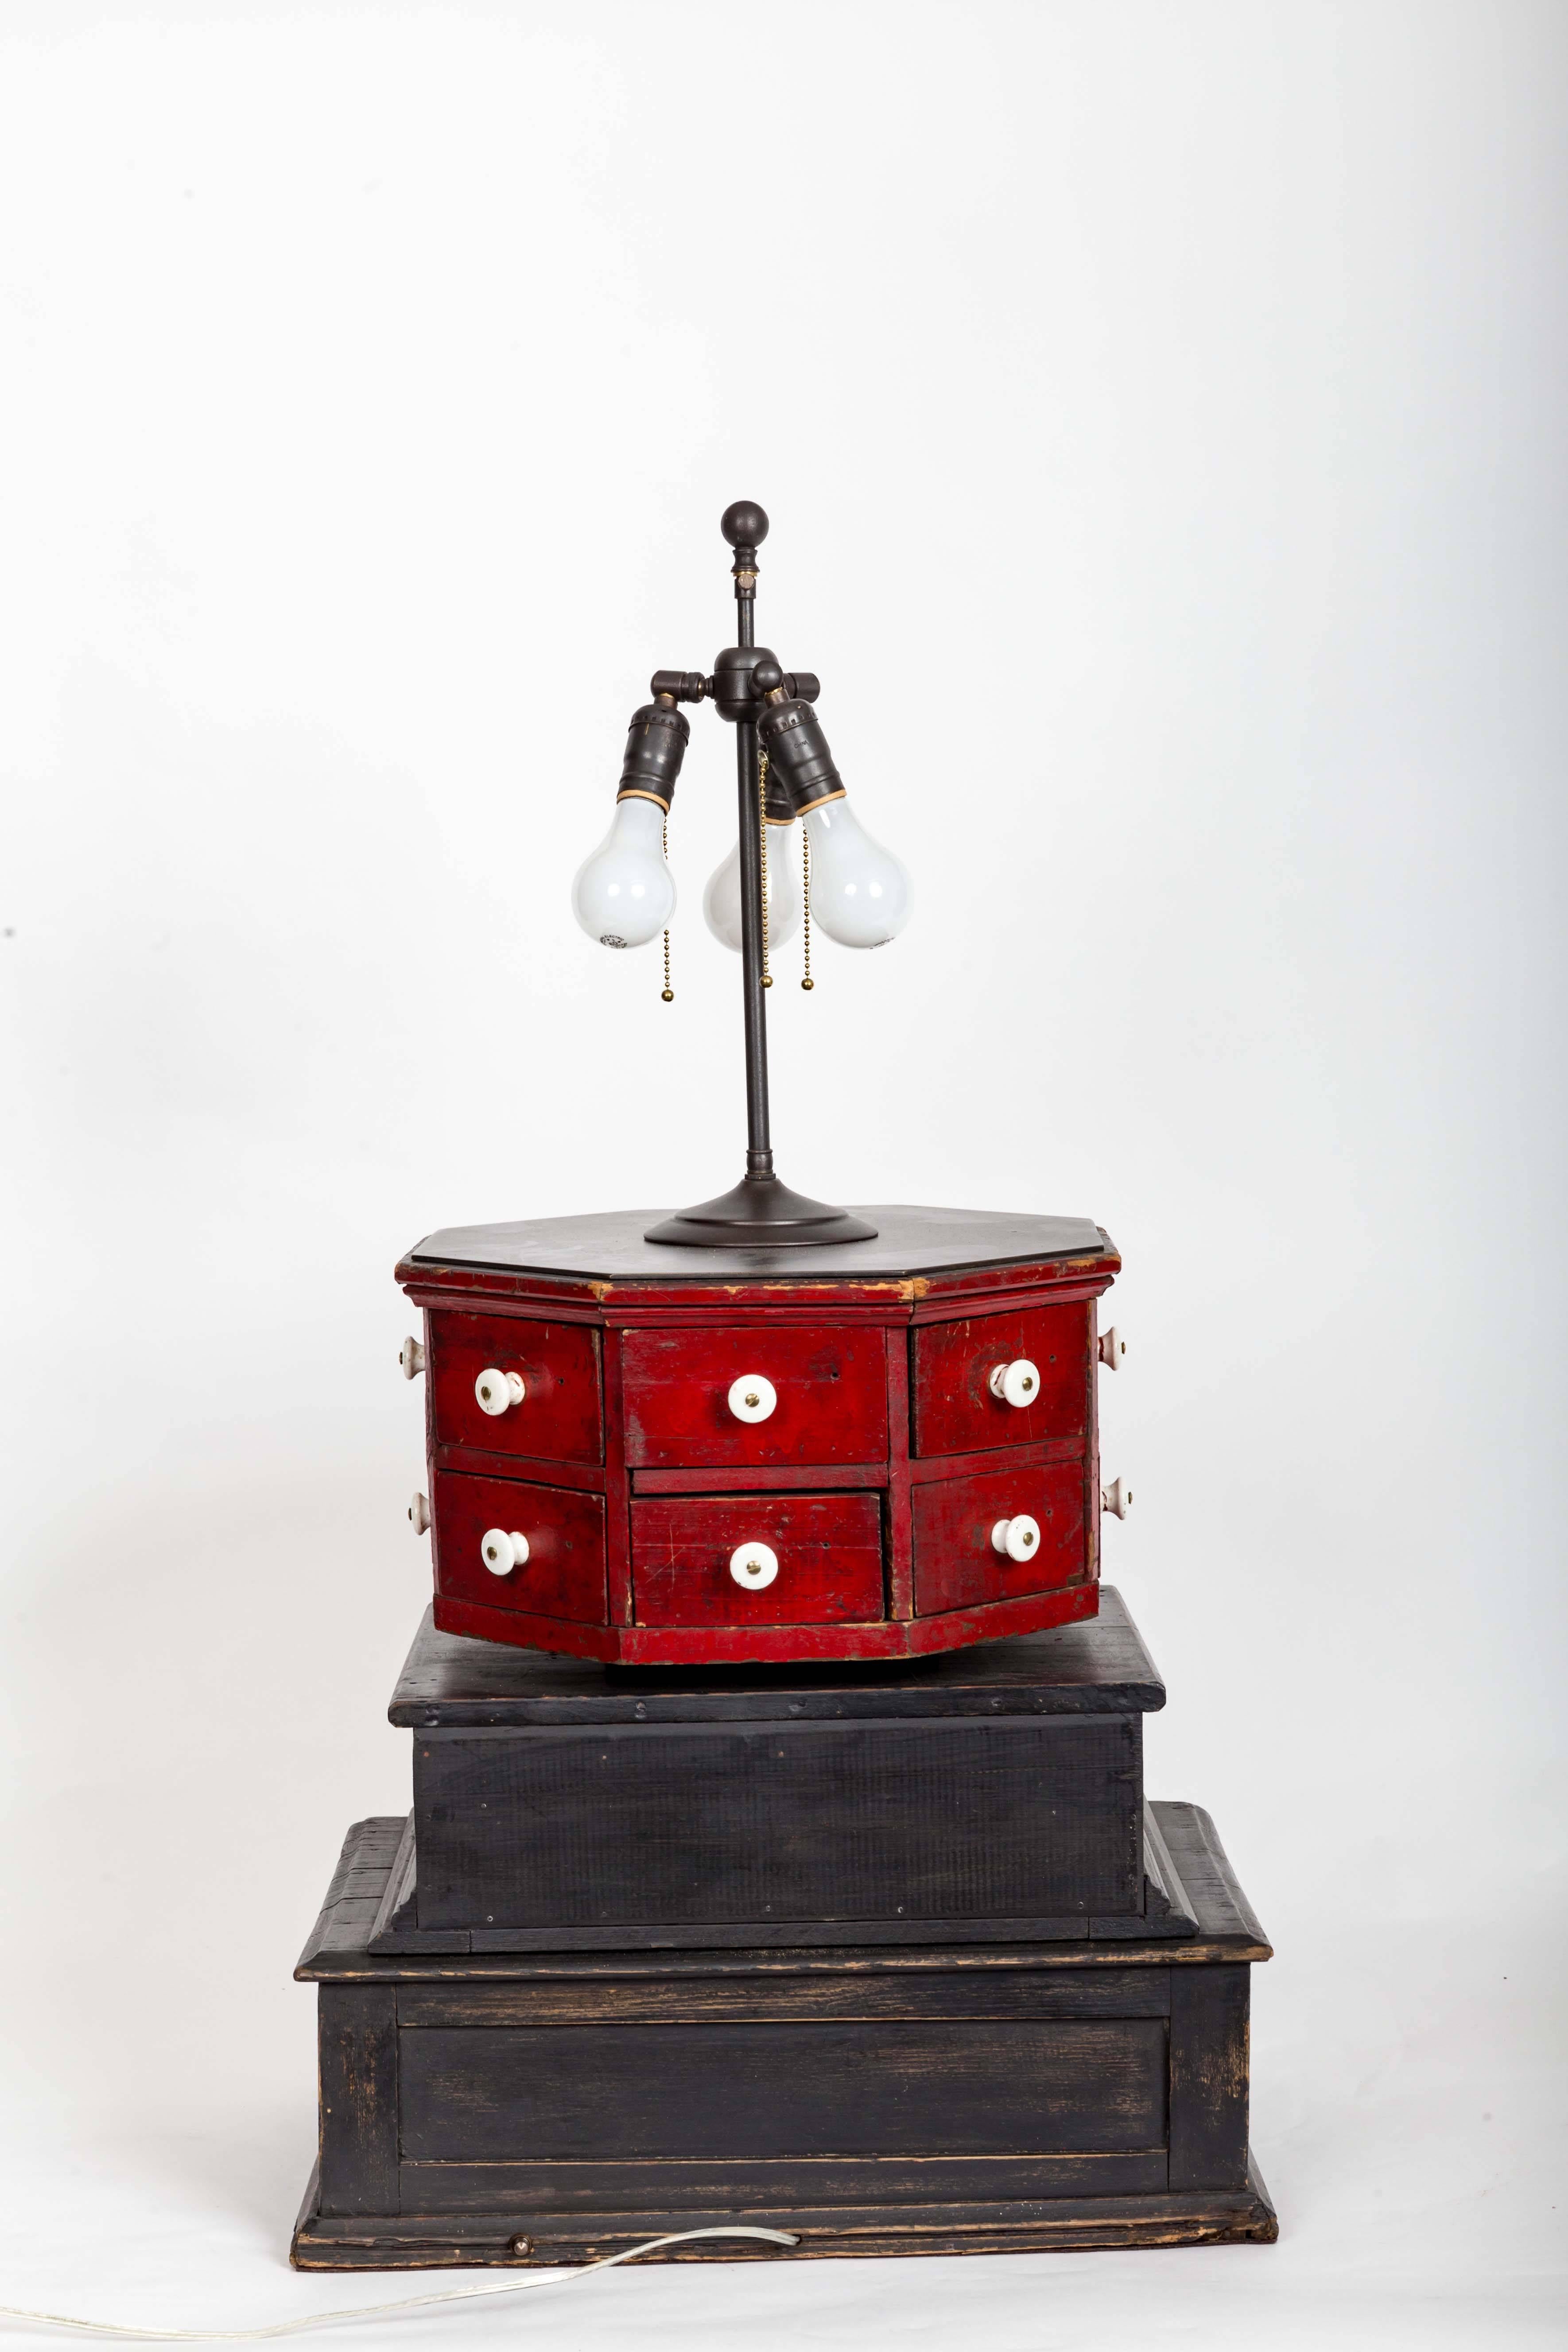 19th Century One-of-a-kind 'Diamond & Baratta' Large-Scale Sewing Box Lamp For Sale